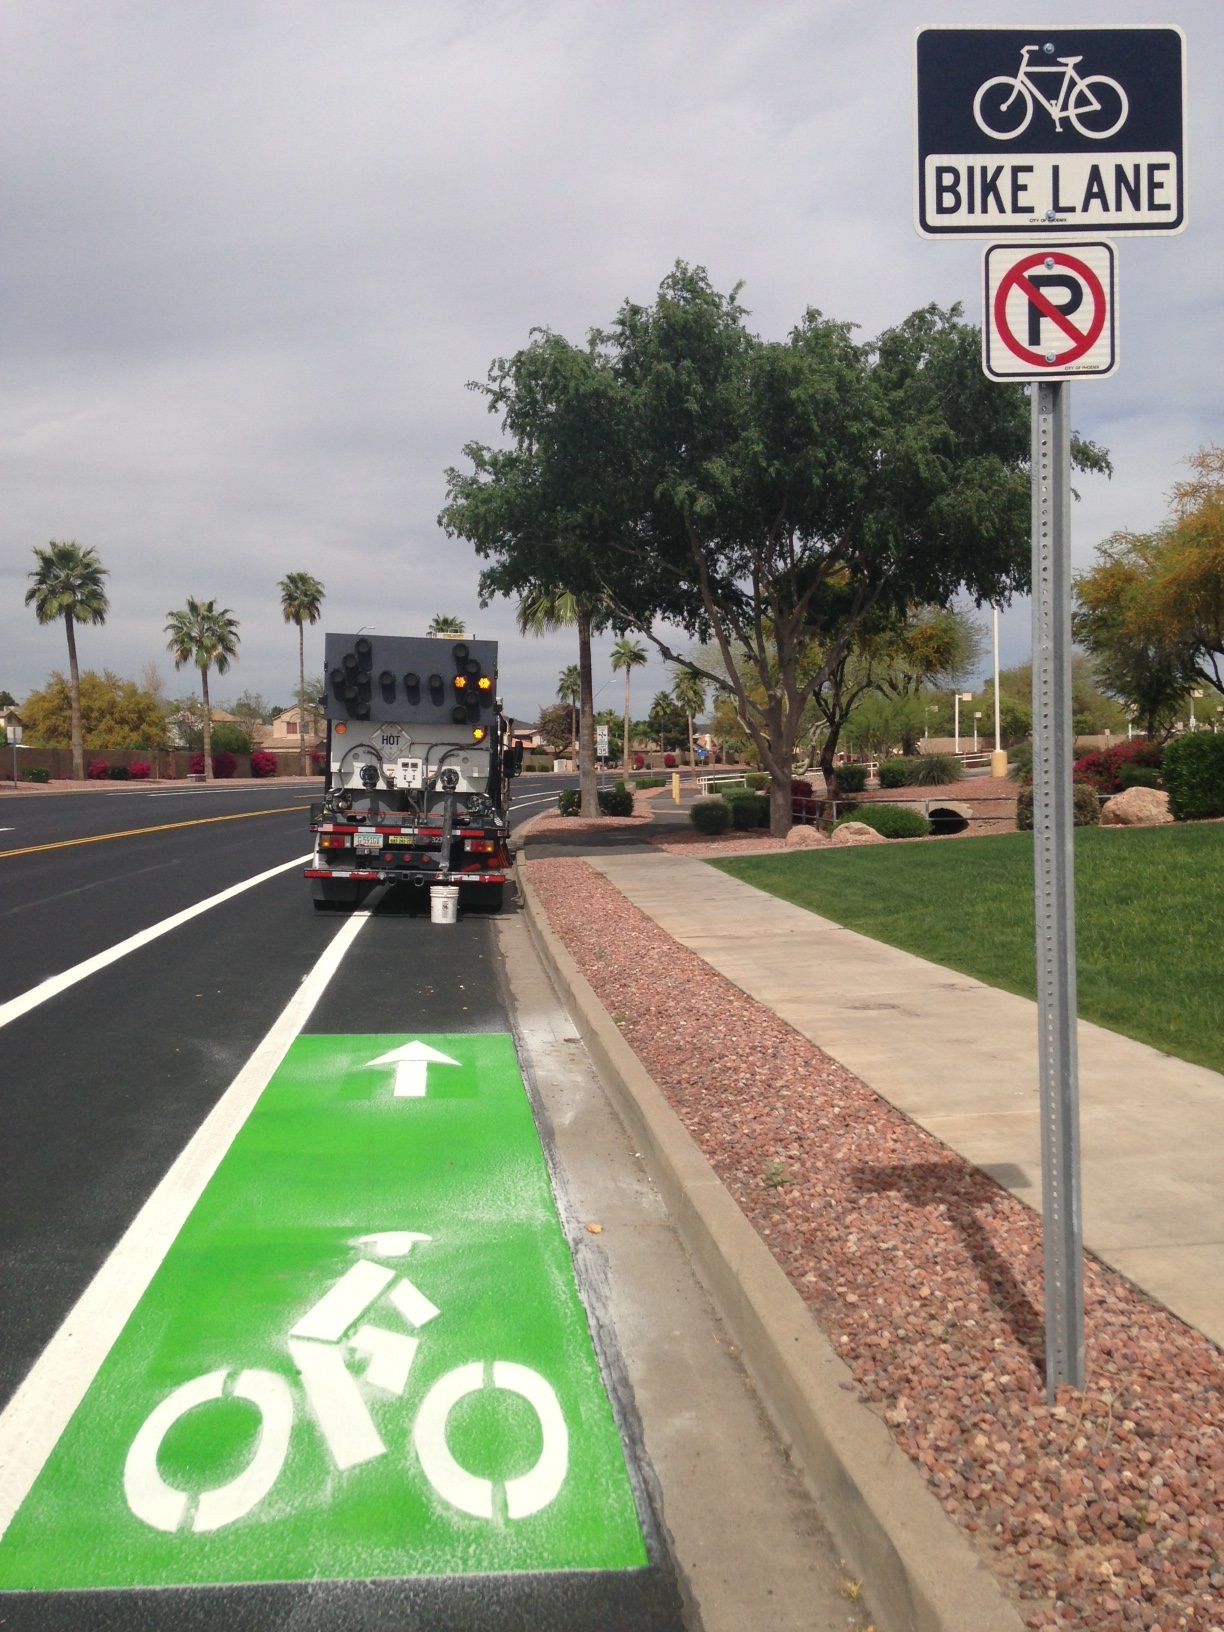 Green bike lane with white symbols being painted